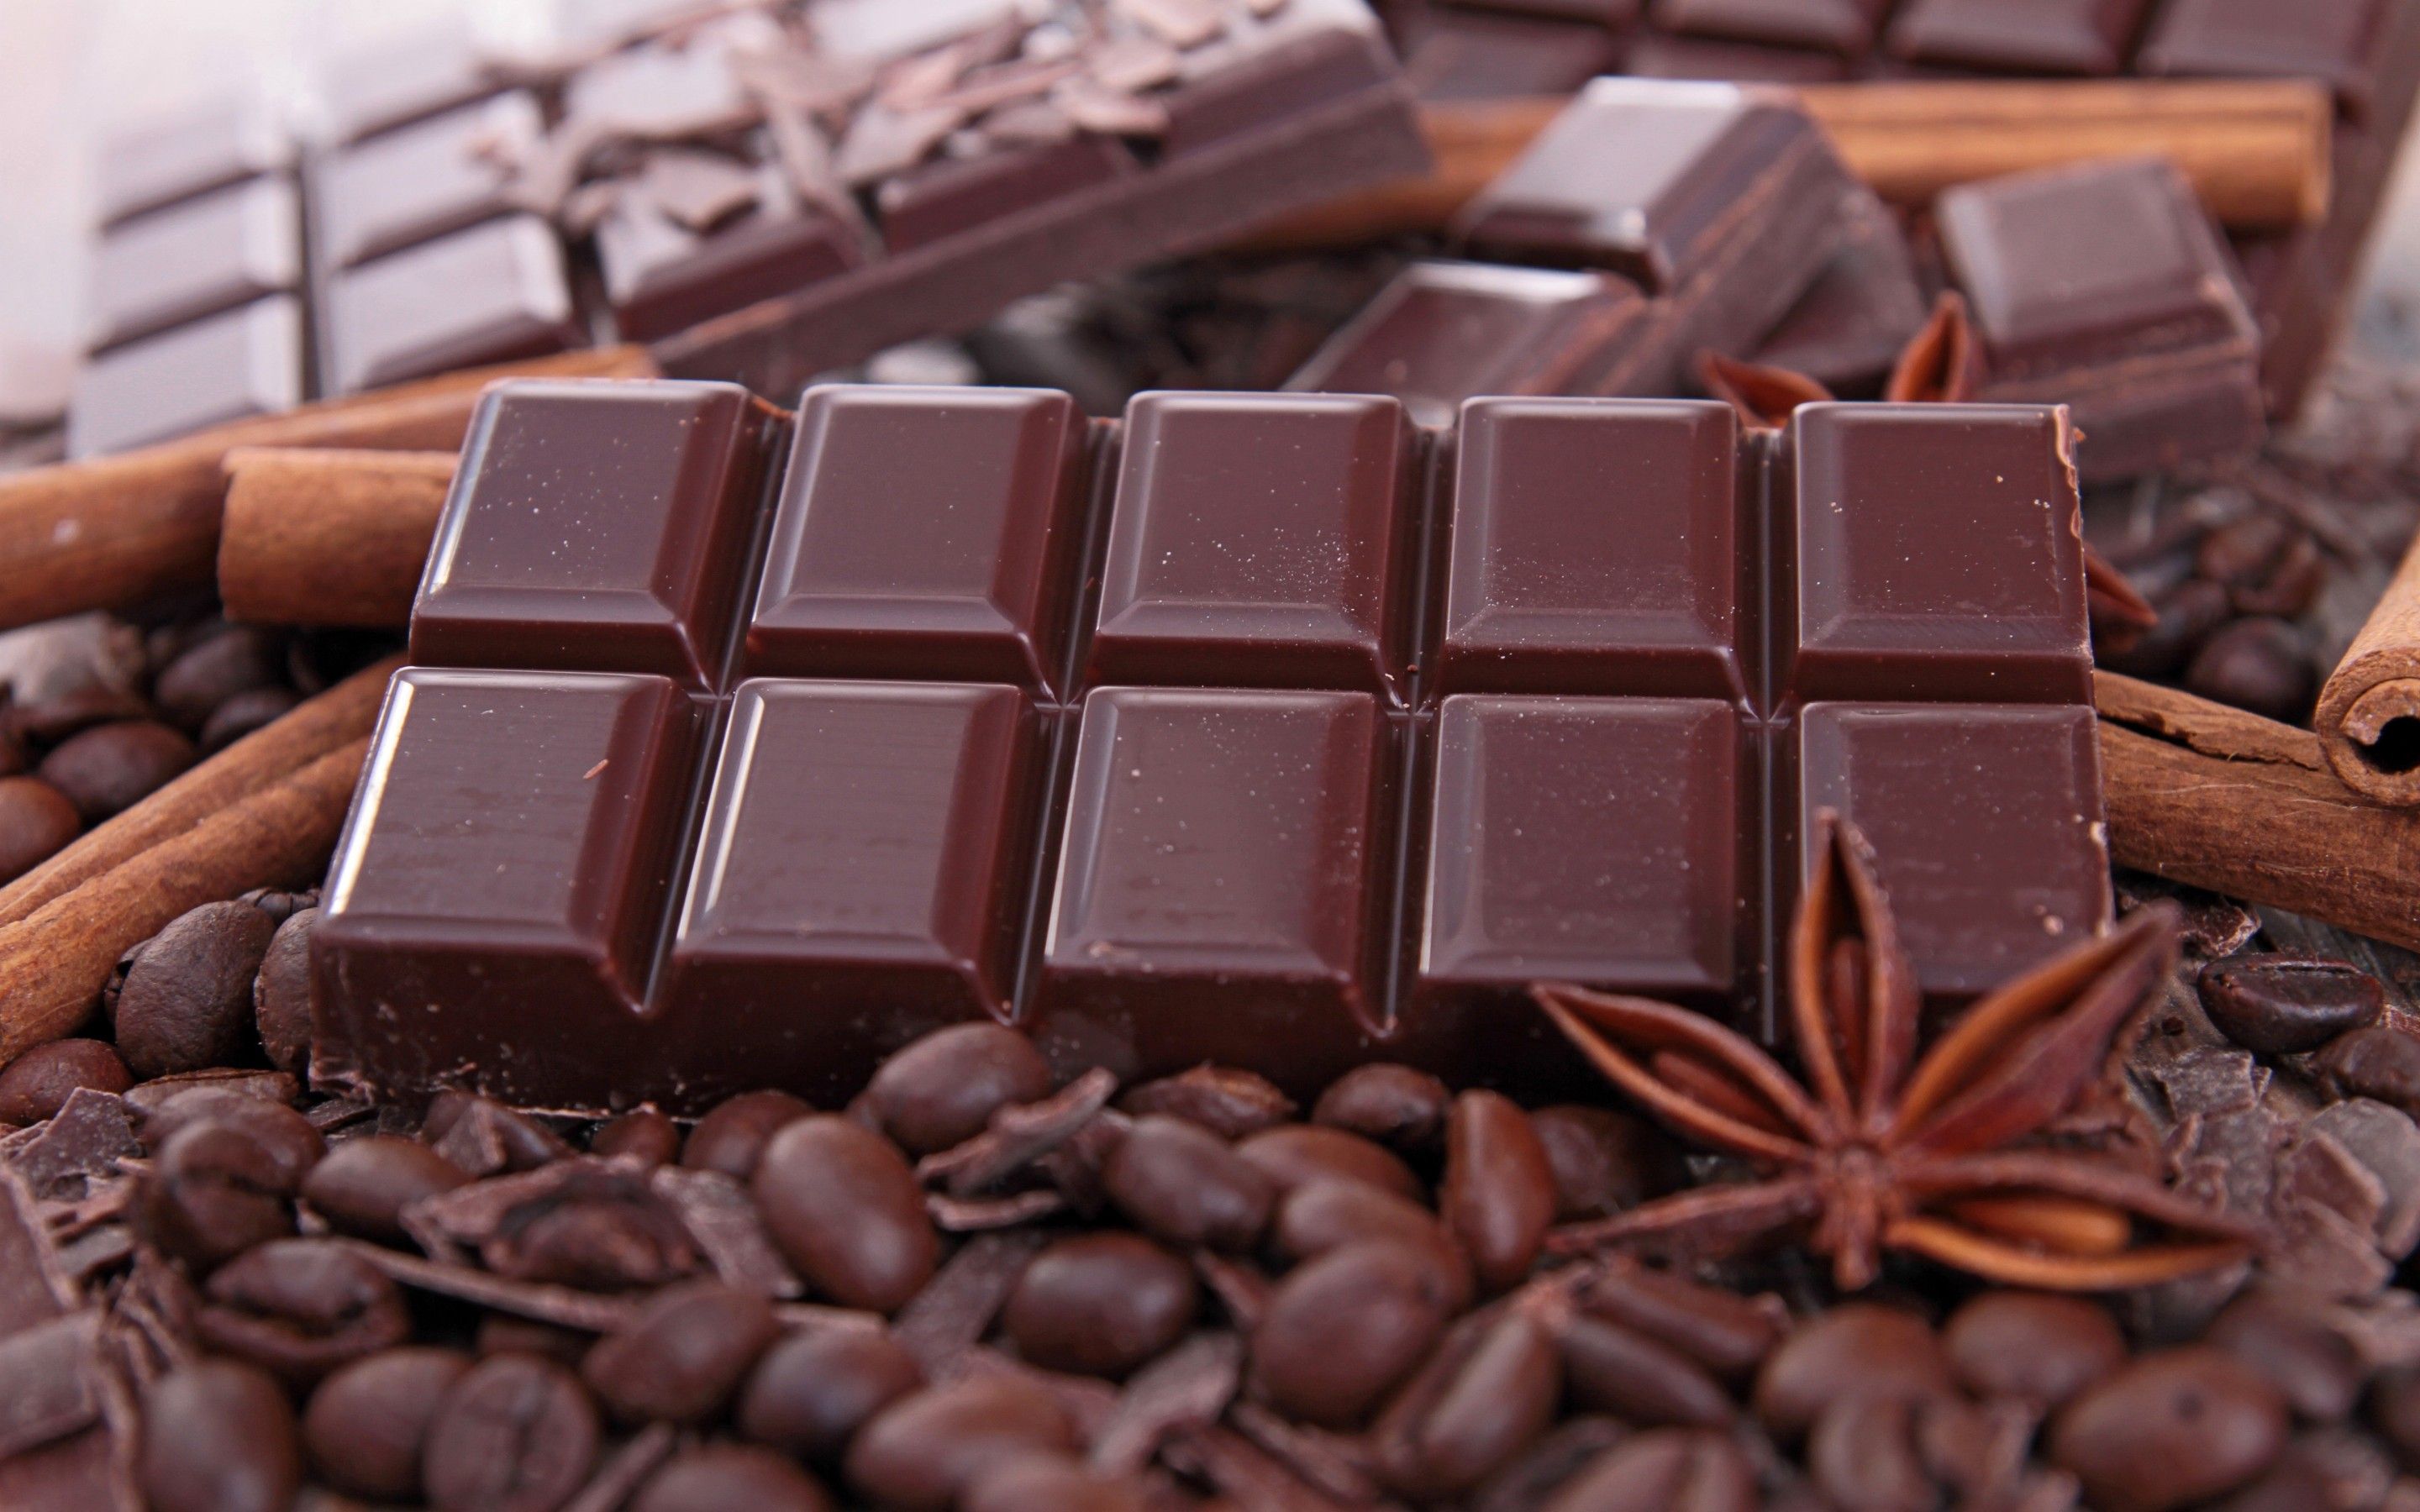 A close up of chocolate bars on top of coffee beans - Chocolate